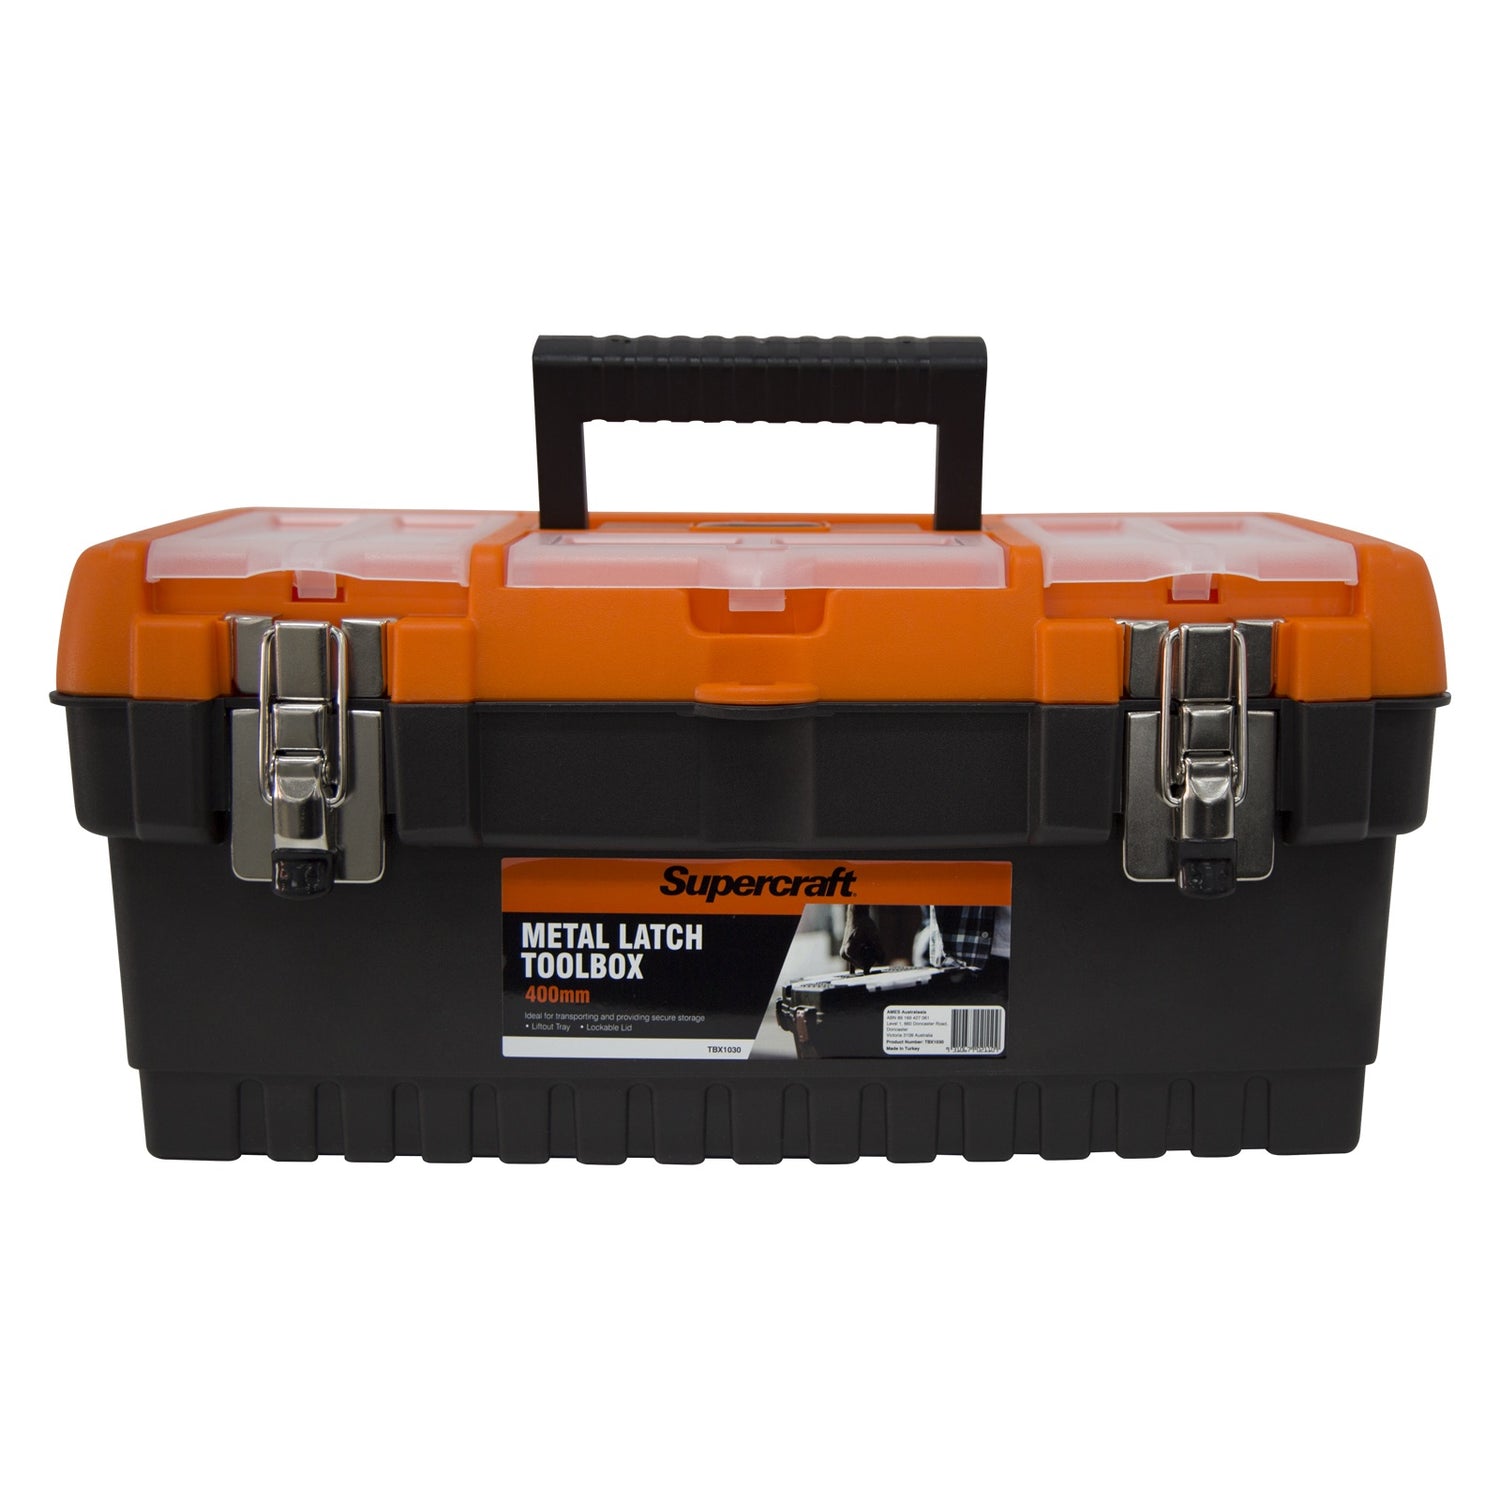 Supercraft Toolbox with Metal Latch 400mm